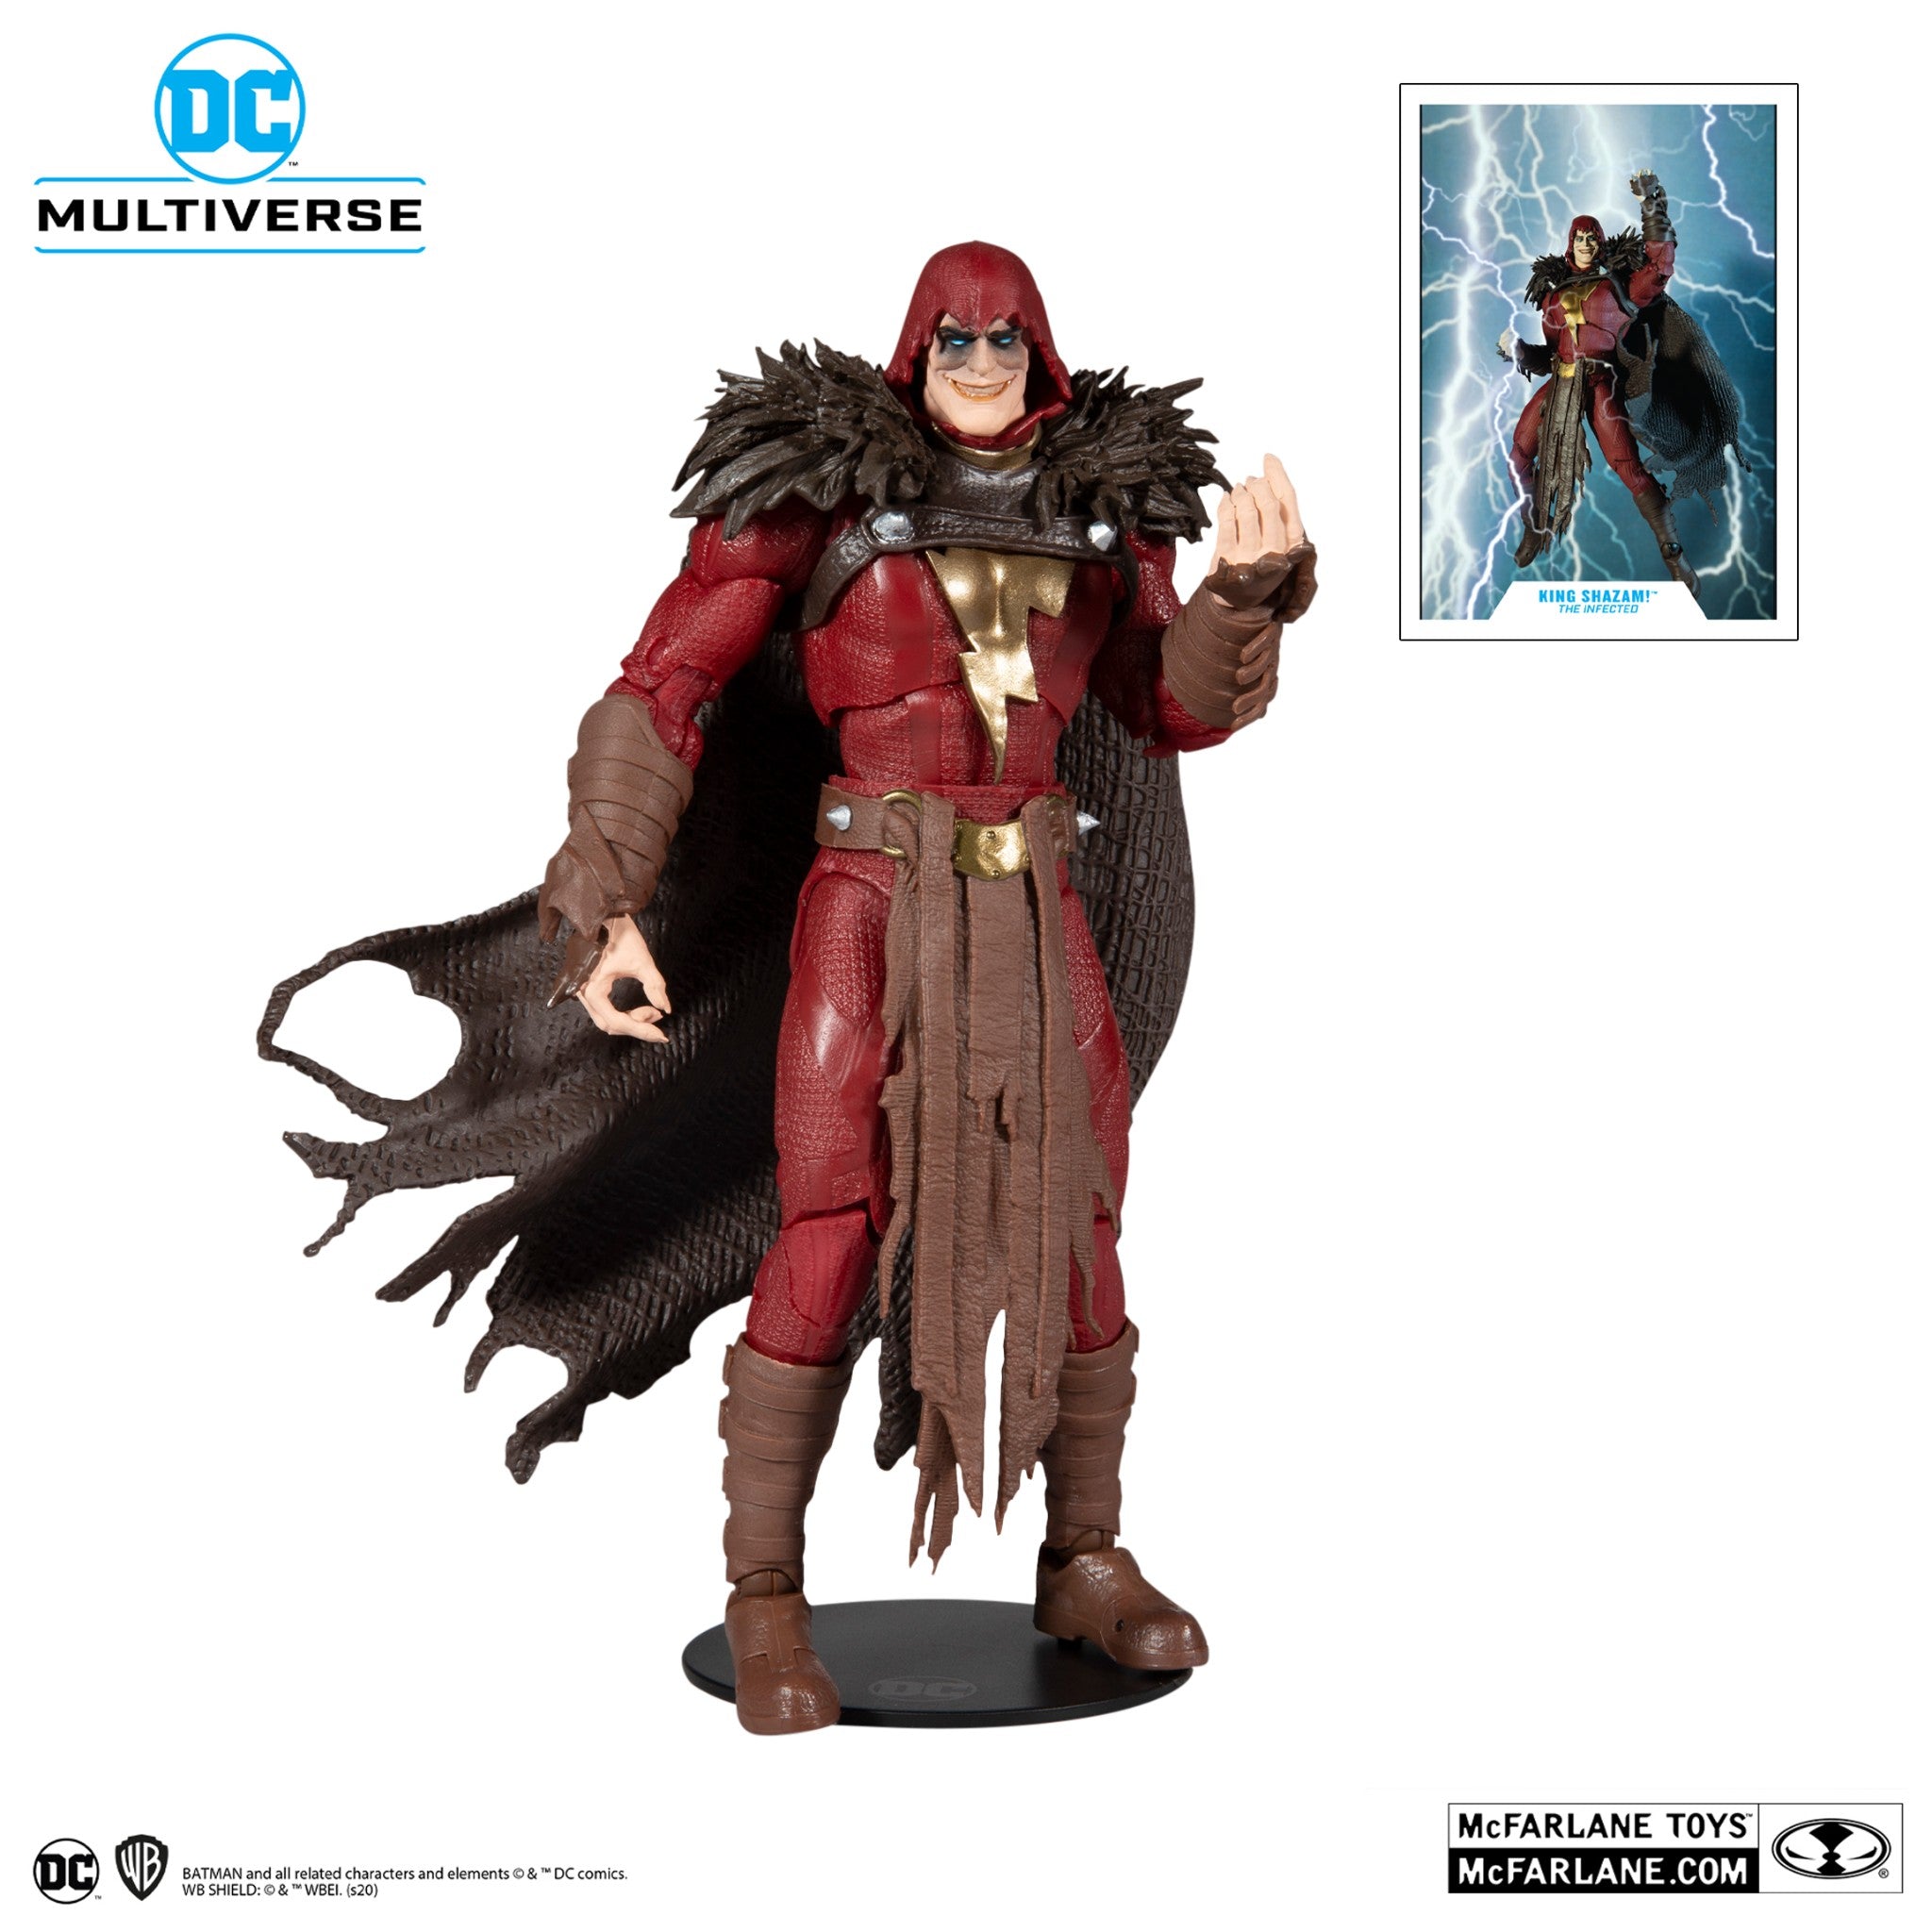 DC Multiverse King Shazam The Infected - McFarlane Toys-3